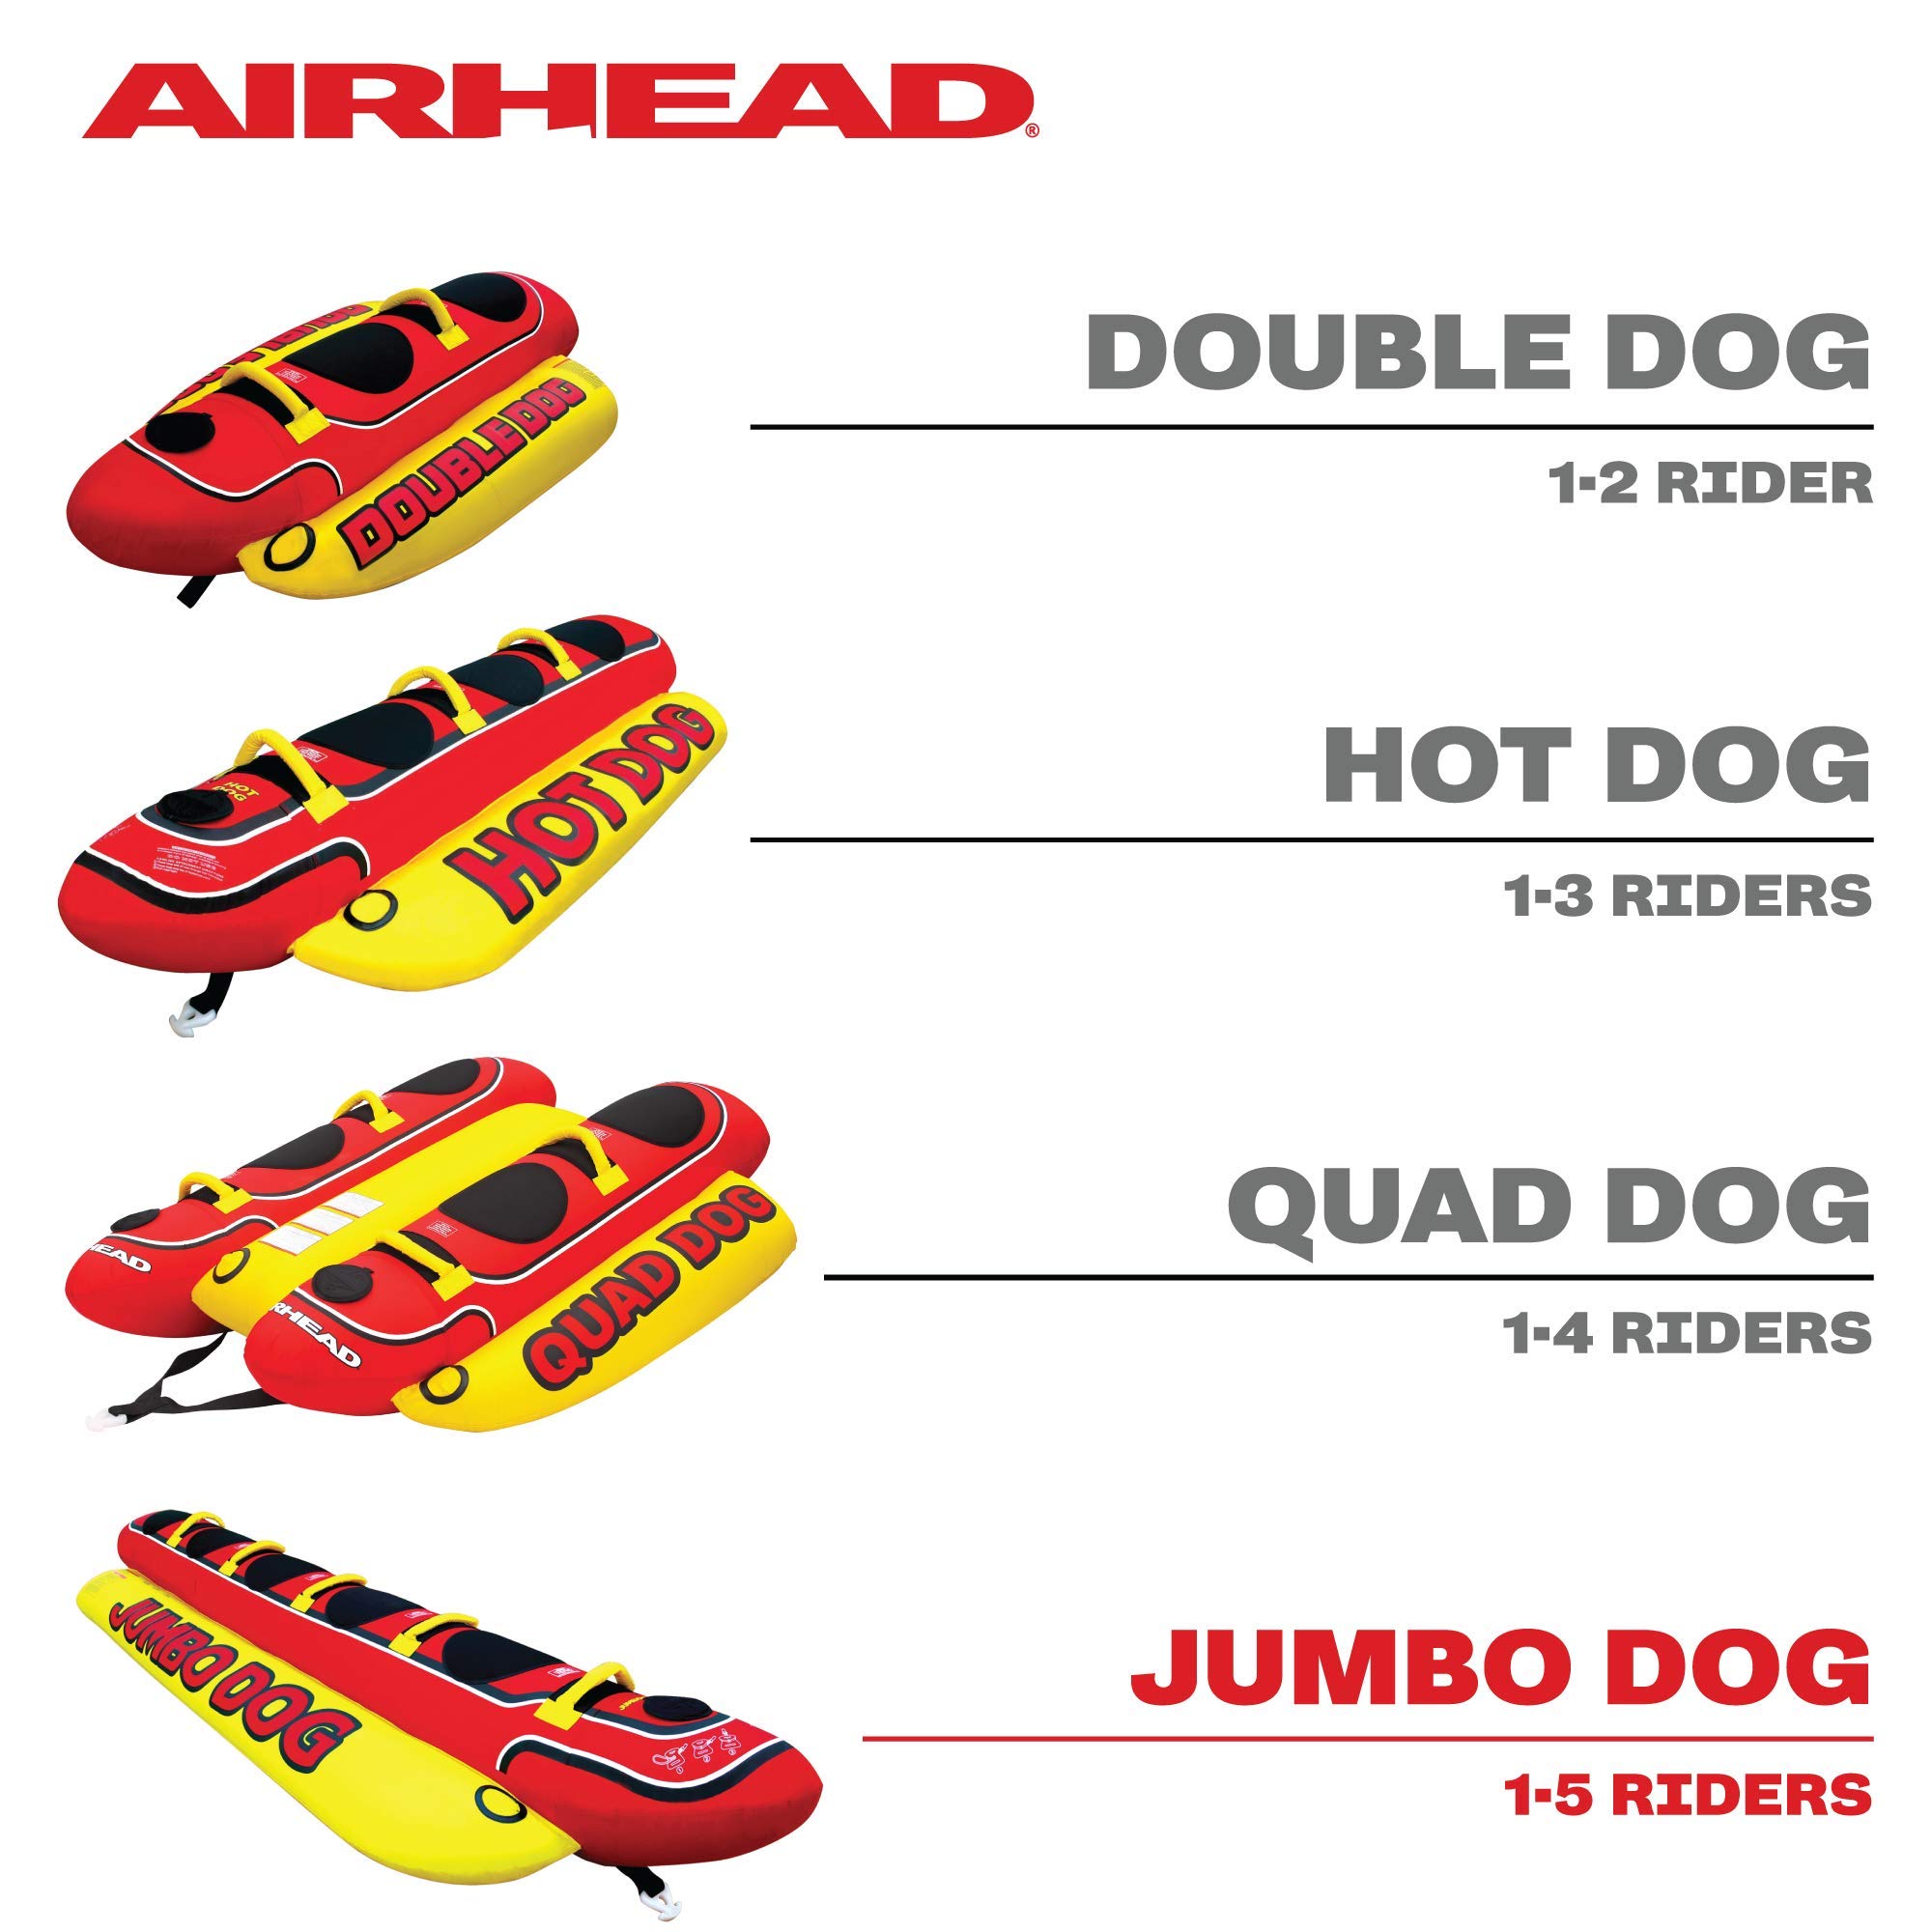 Airhead Hot Dog Towable 1-5 Rider Tube for Boating and Water Sports, Neoprene Seat Pads, Double-Stitched Full Nylon Cover, and Boston Valve for Convenient Inflating & Deflating